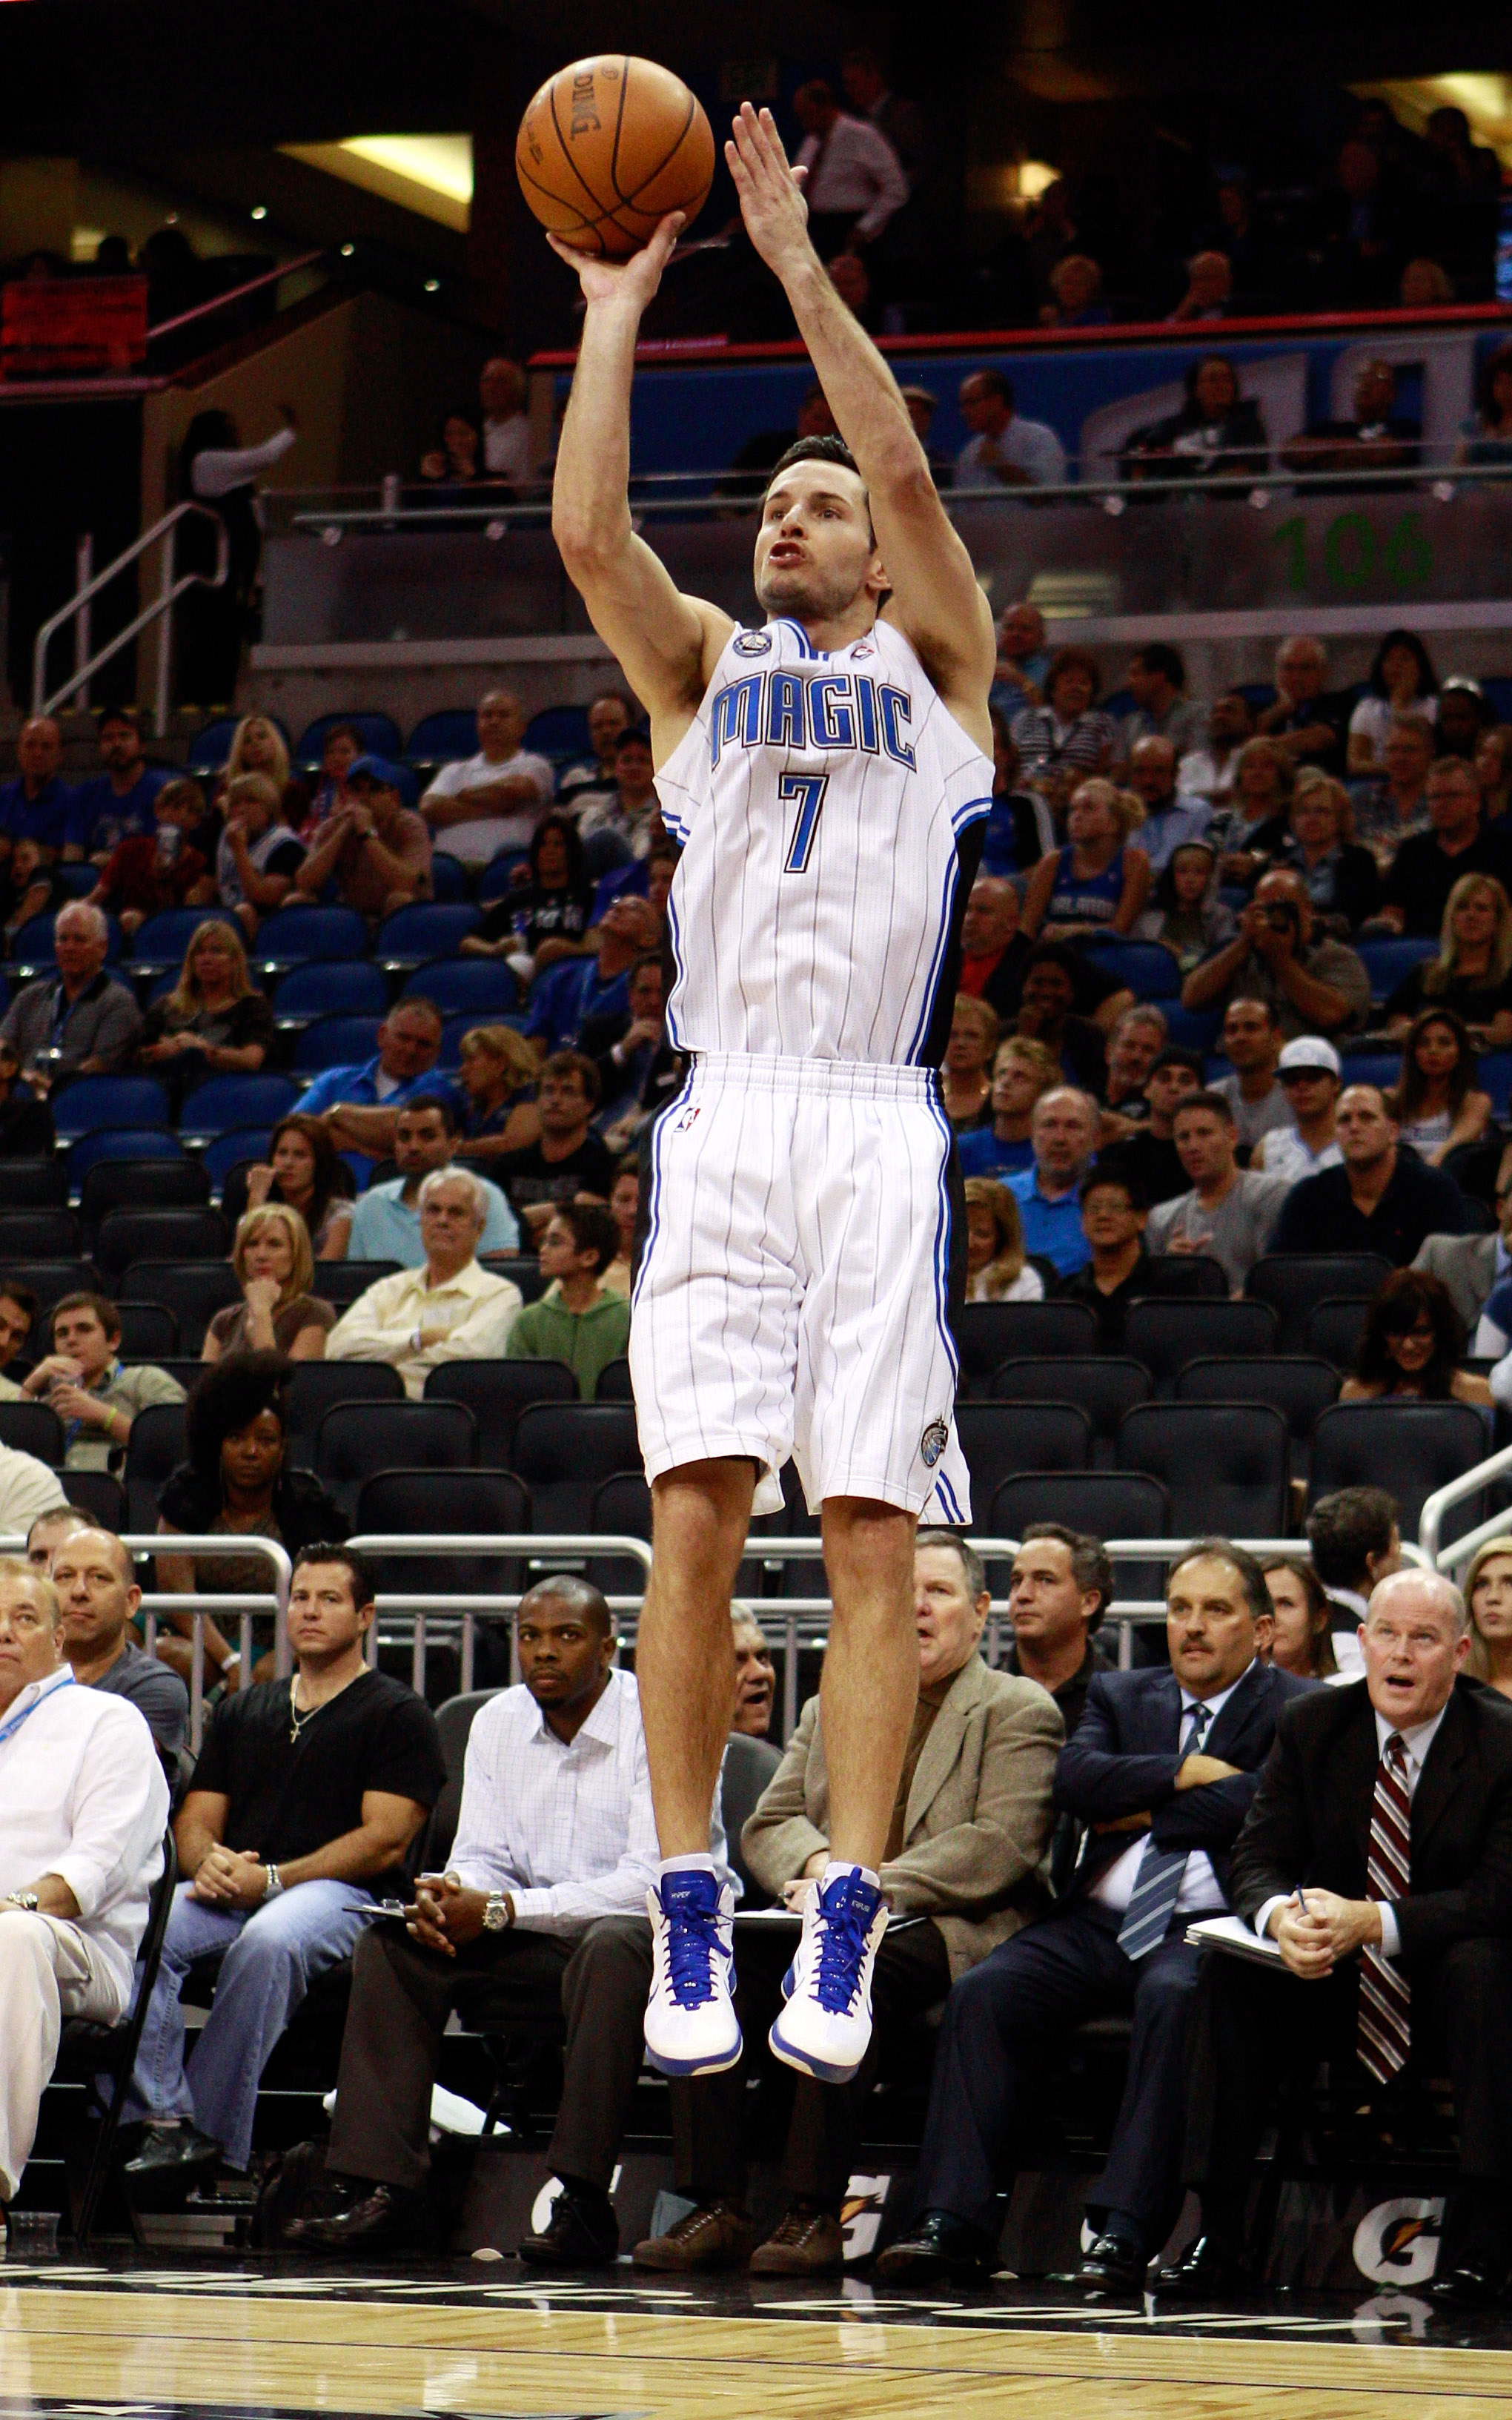 ORLANDO, FL - OCTOBER 10:  J.J. Redick #7 of the Orlando Magic attempts a shot during the game against the New Orleans Hornets at Amway Arena on October 10, 2010 in Orlando, Florida. NOTE TO USER: User expressly acknowledges and agrees that, by downloadin